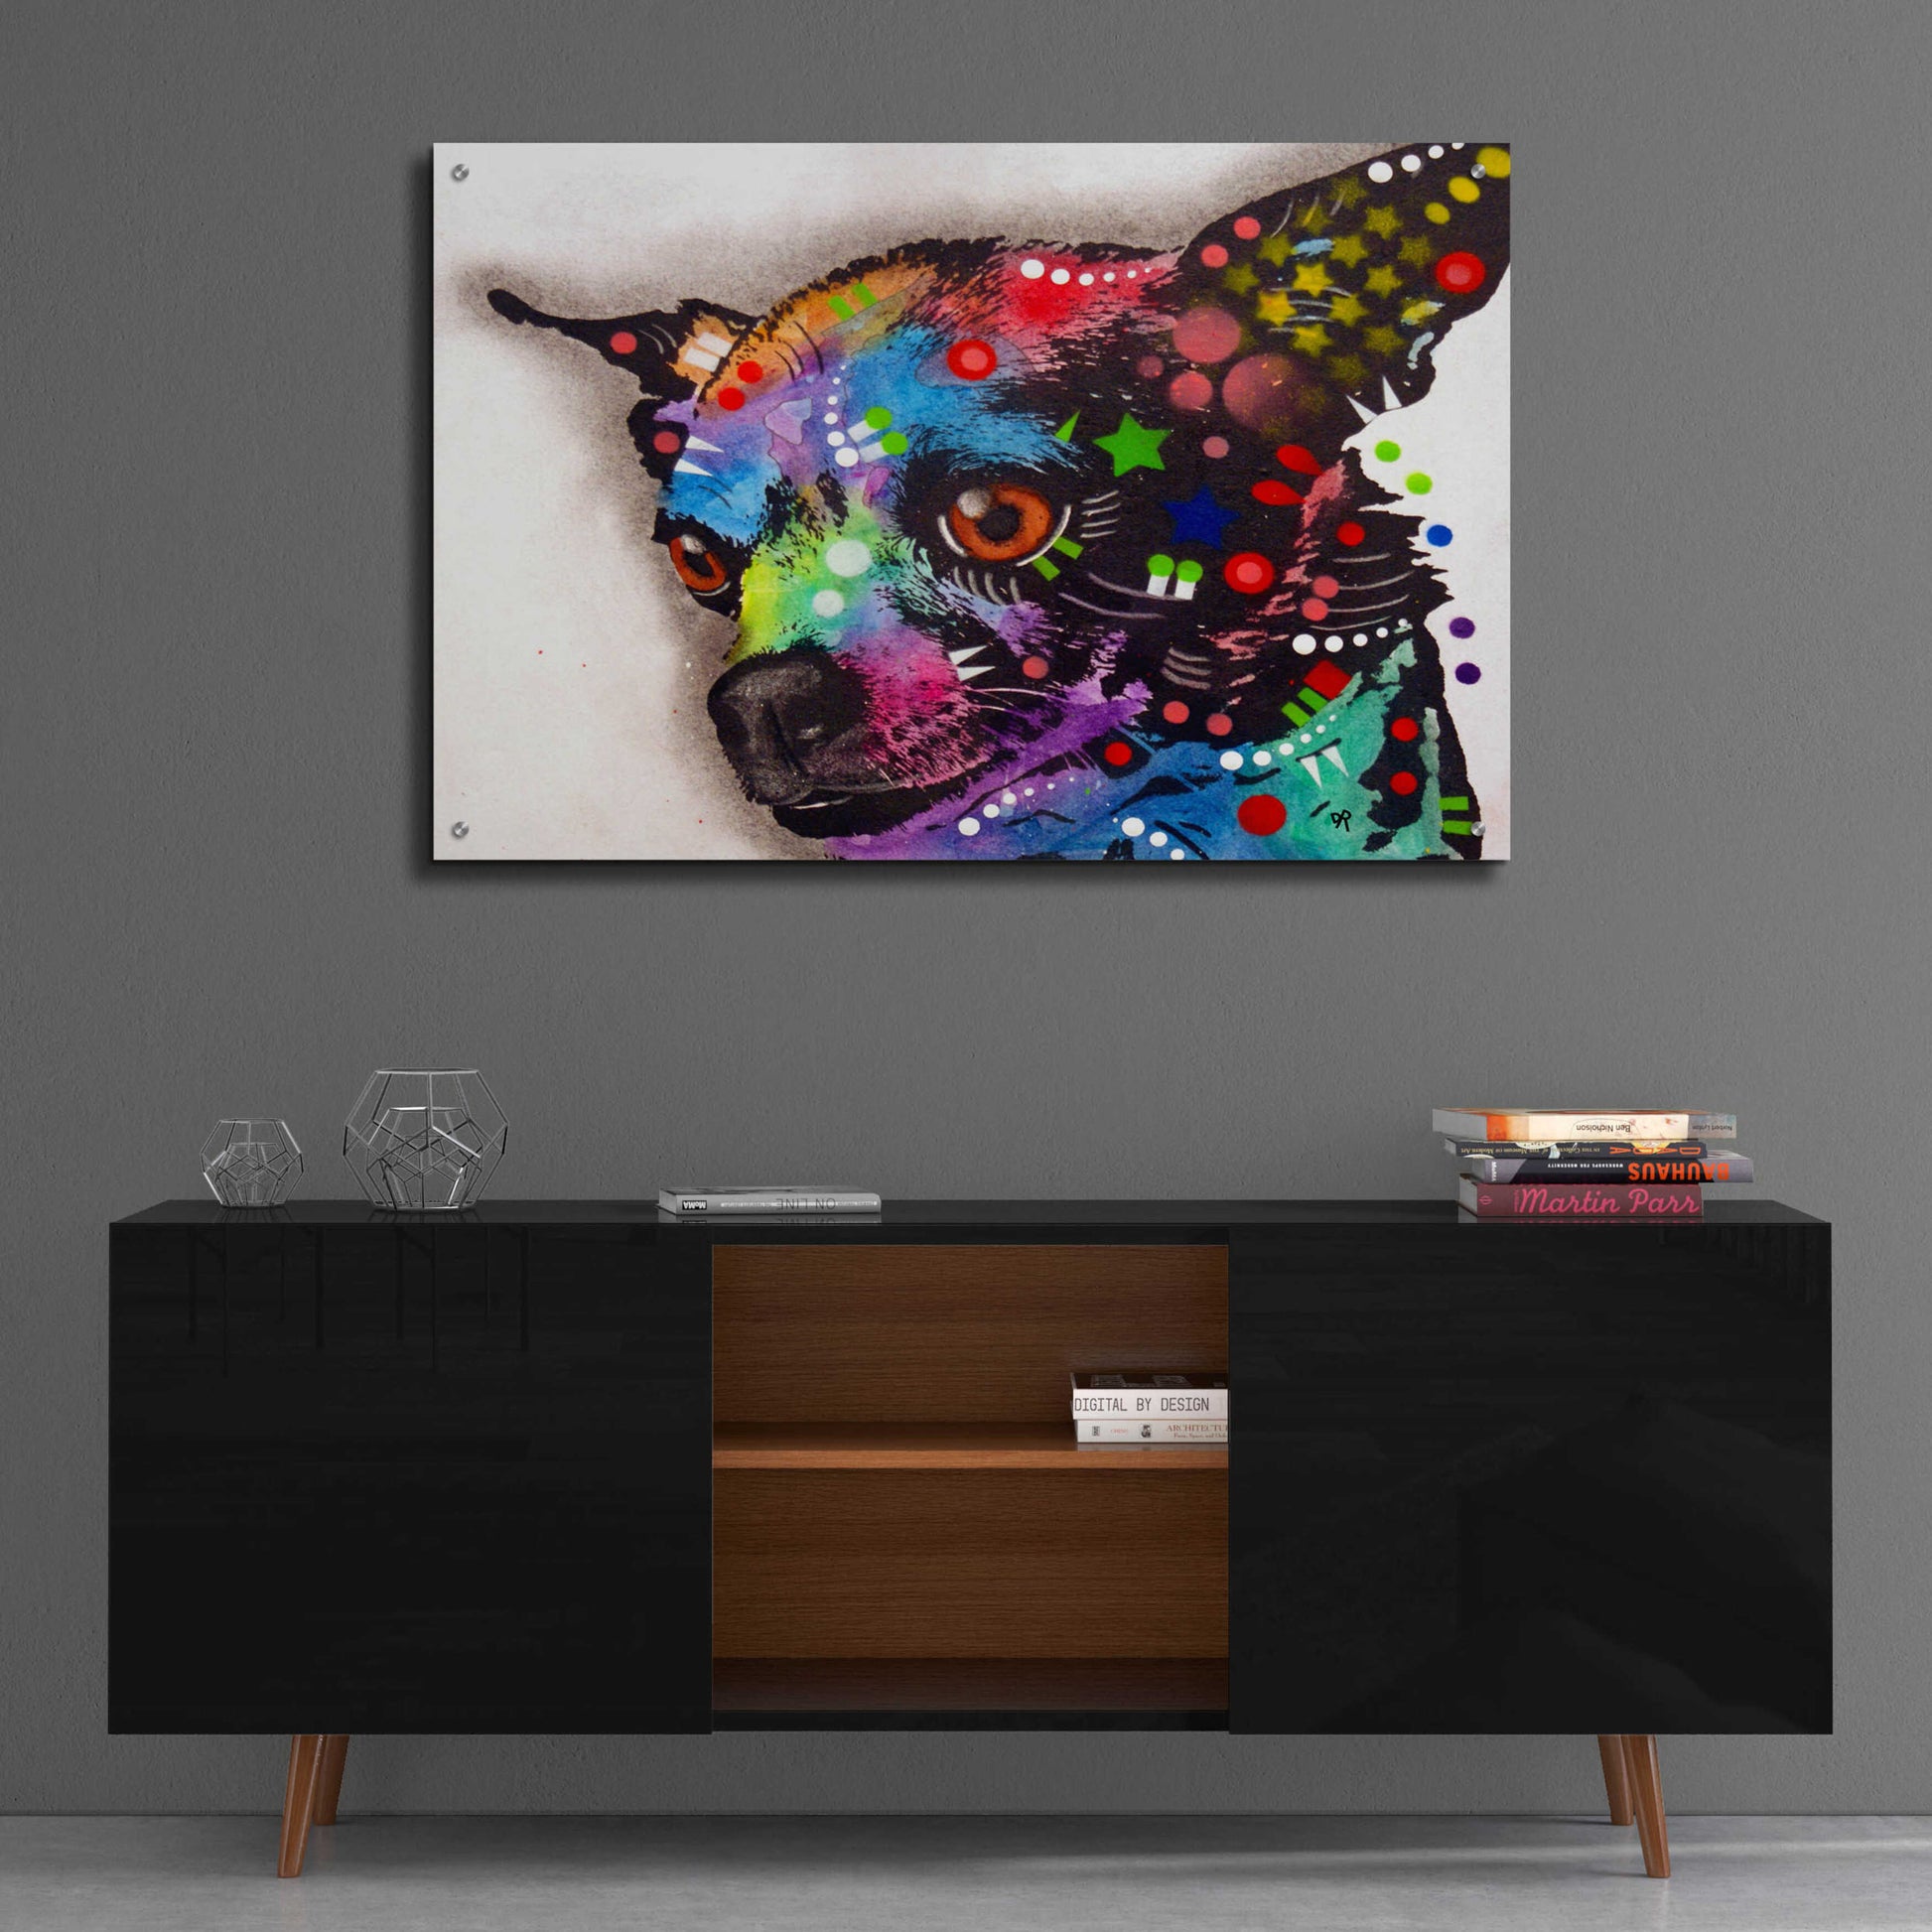 Epic Art 'CHICHI' by Dean Russo, Acrylic Glass Wall Art,36x24